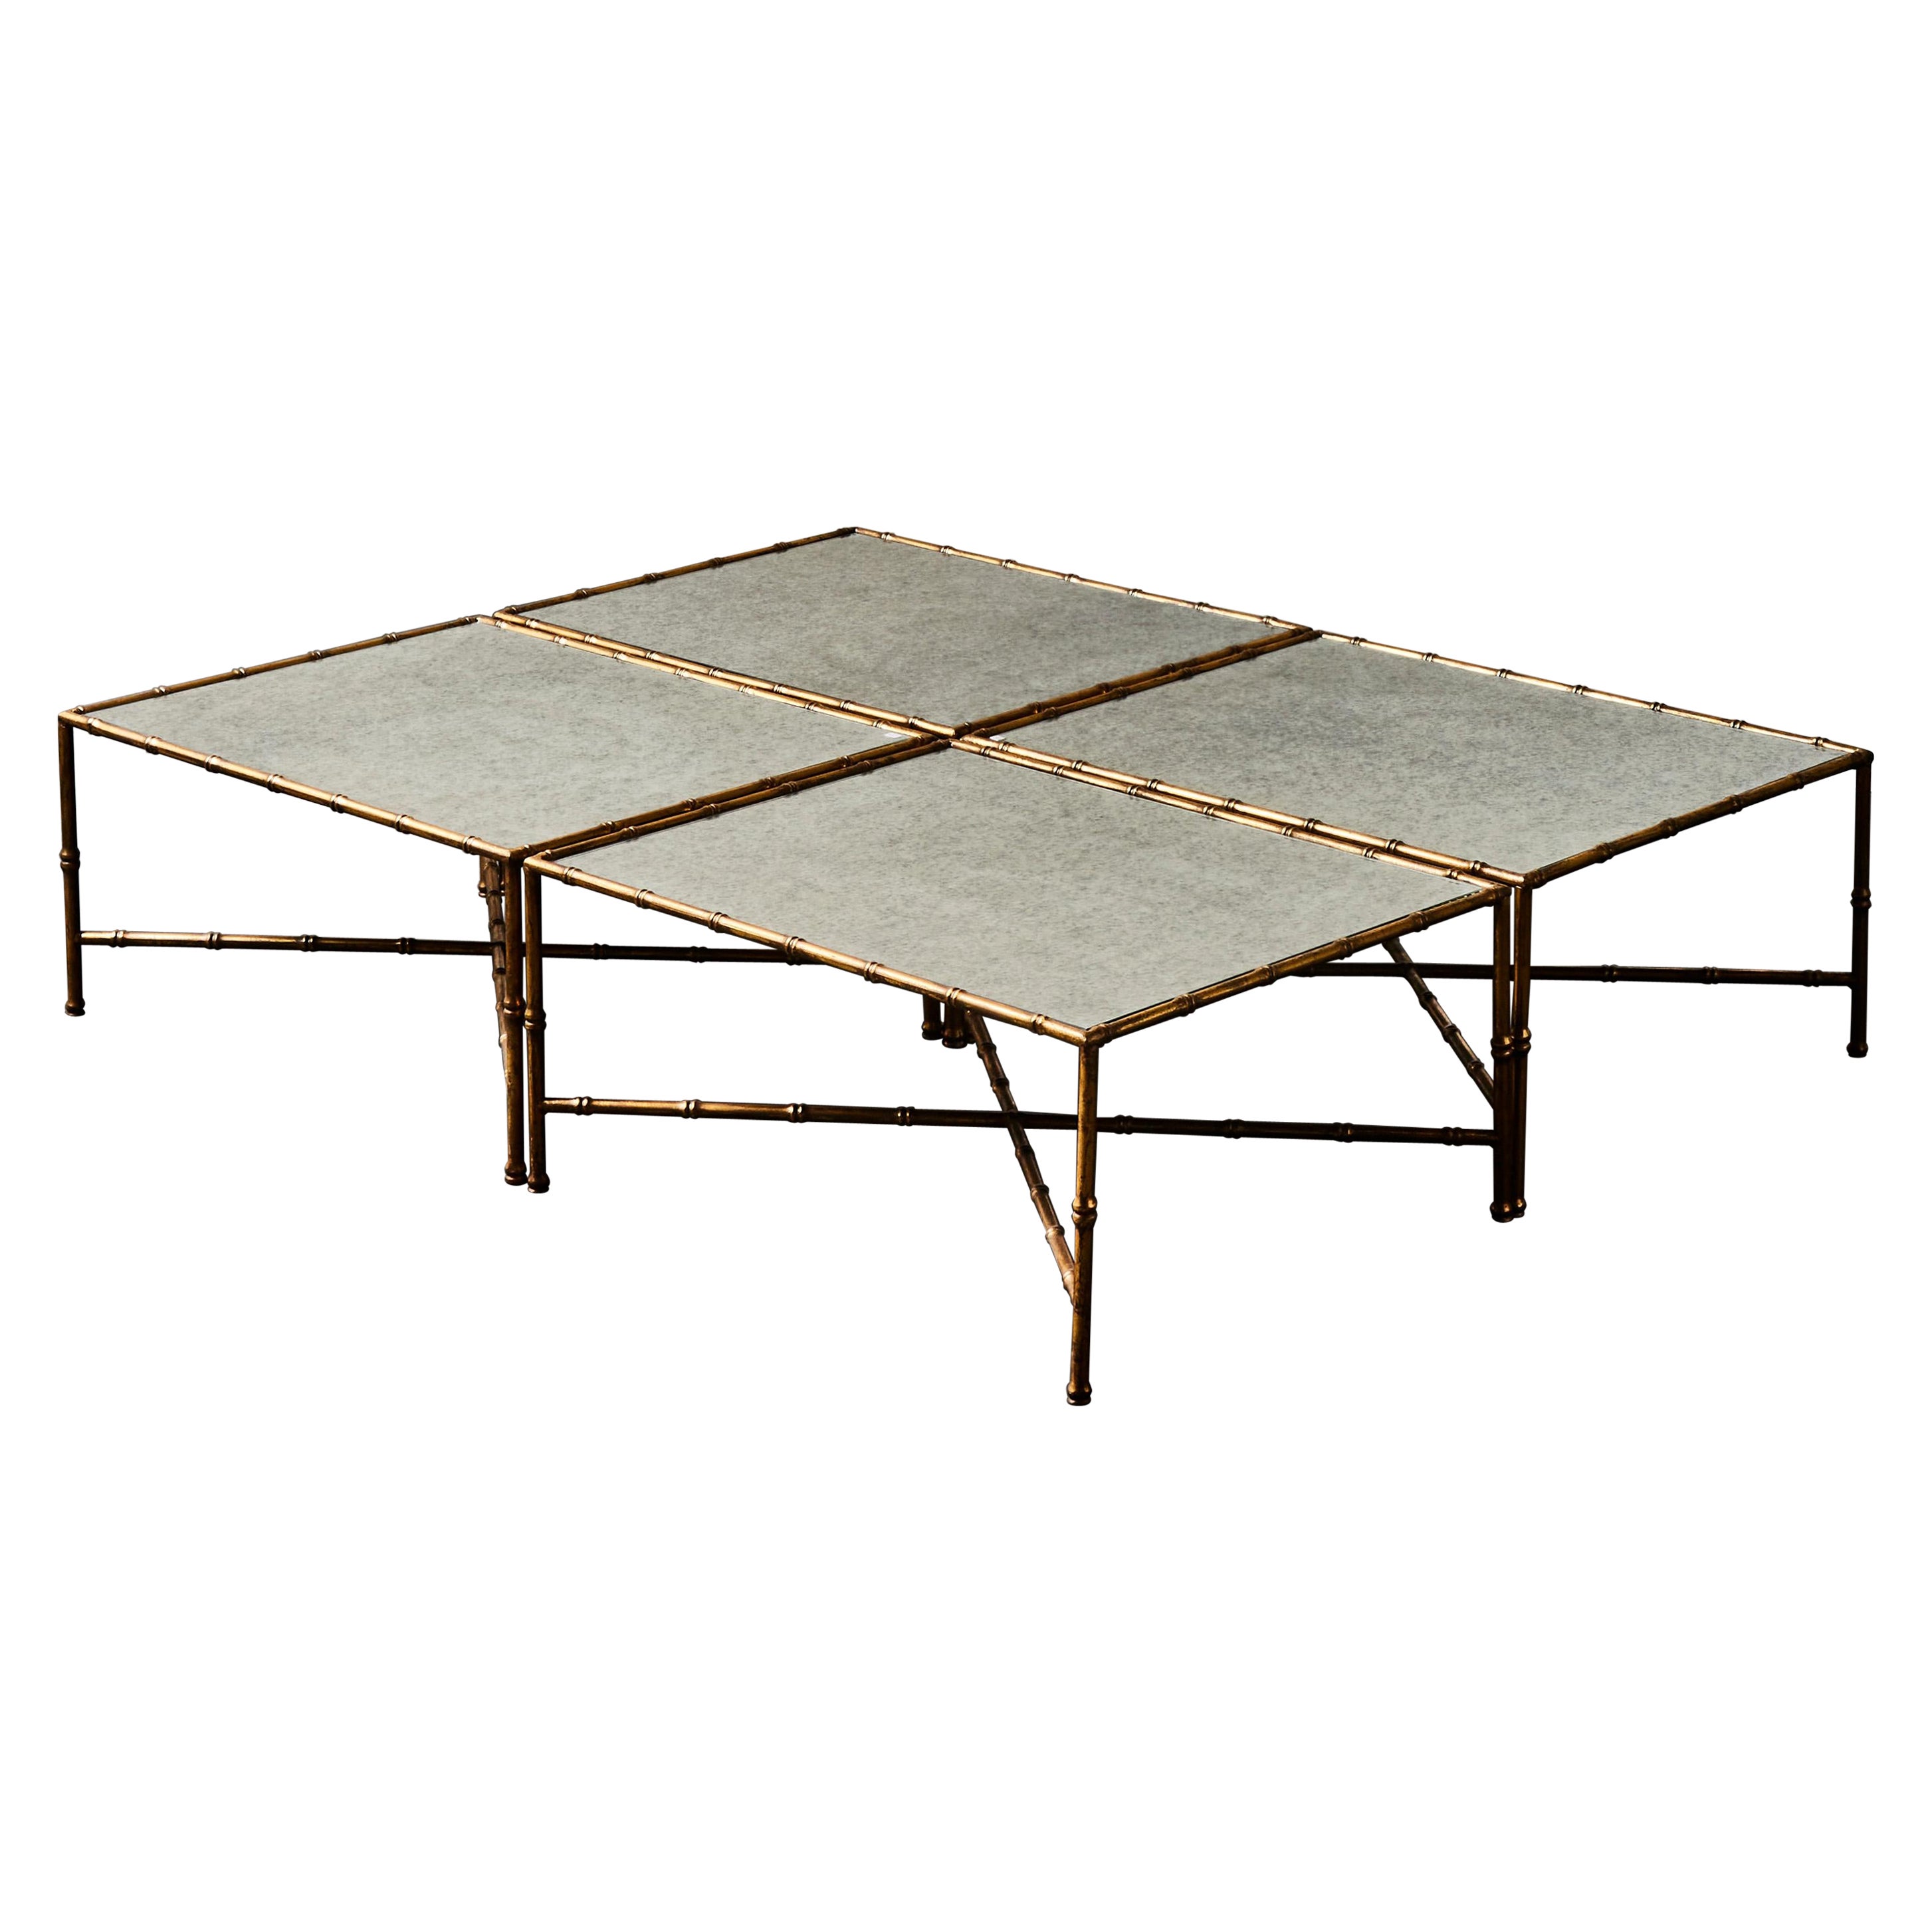 Set of 4 Coffee Tables in Mirror at Cost Price